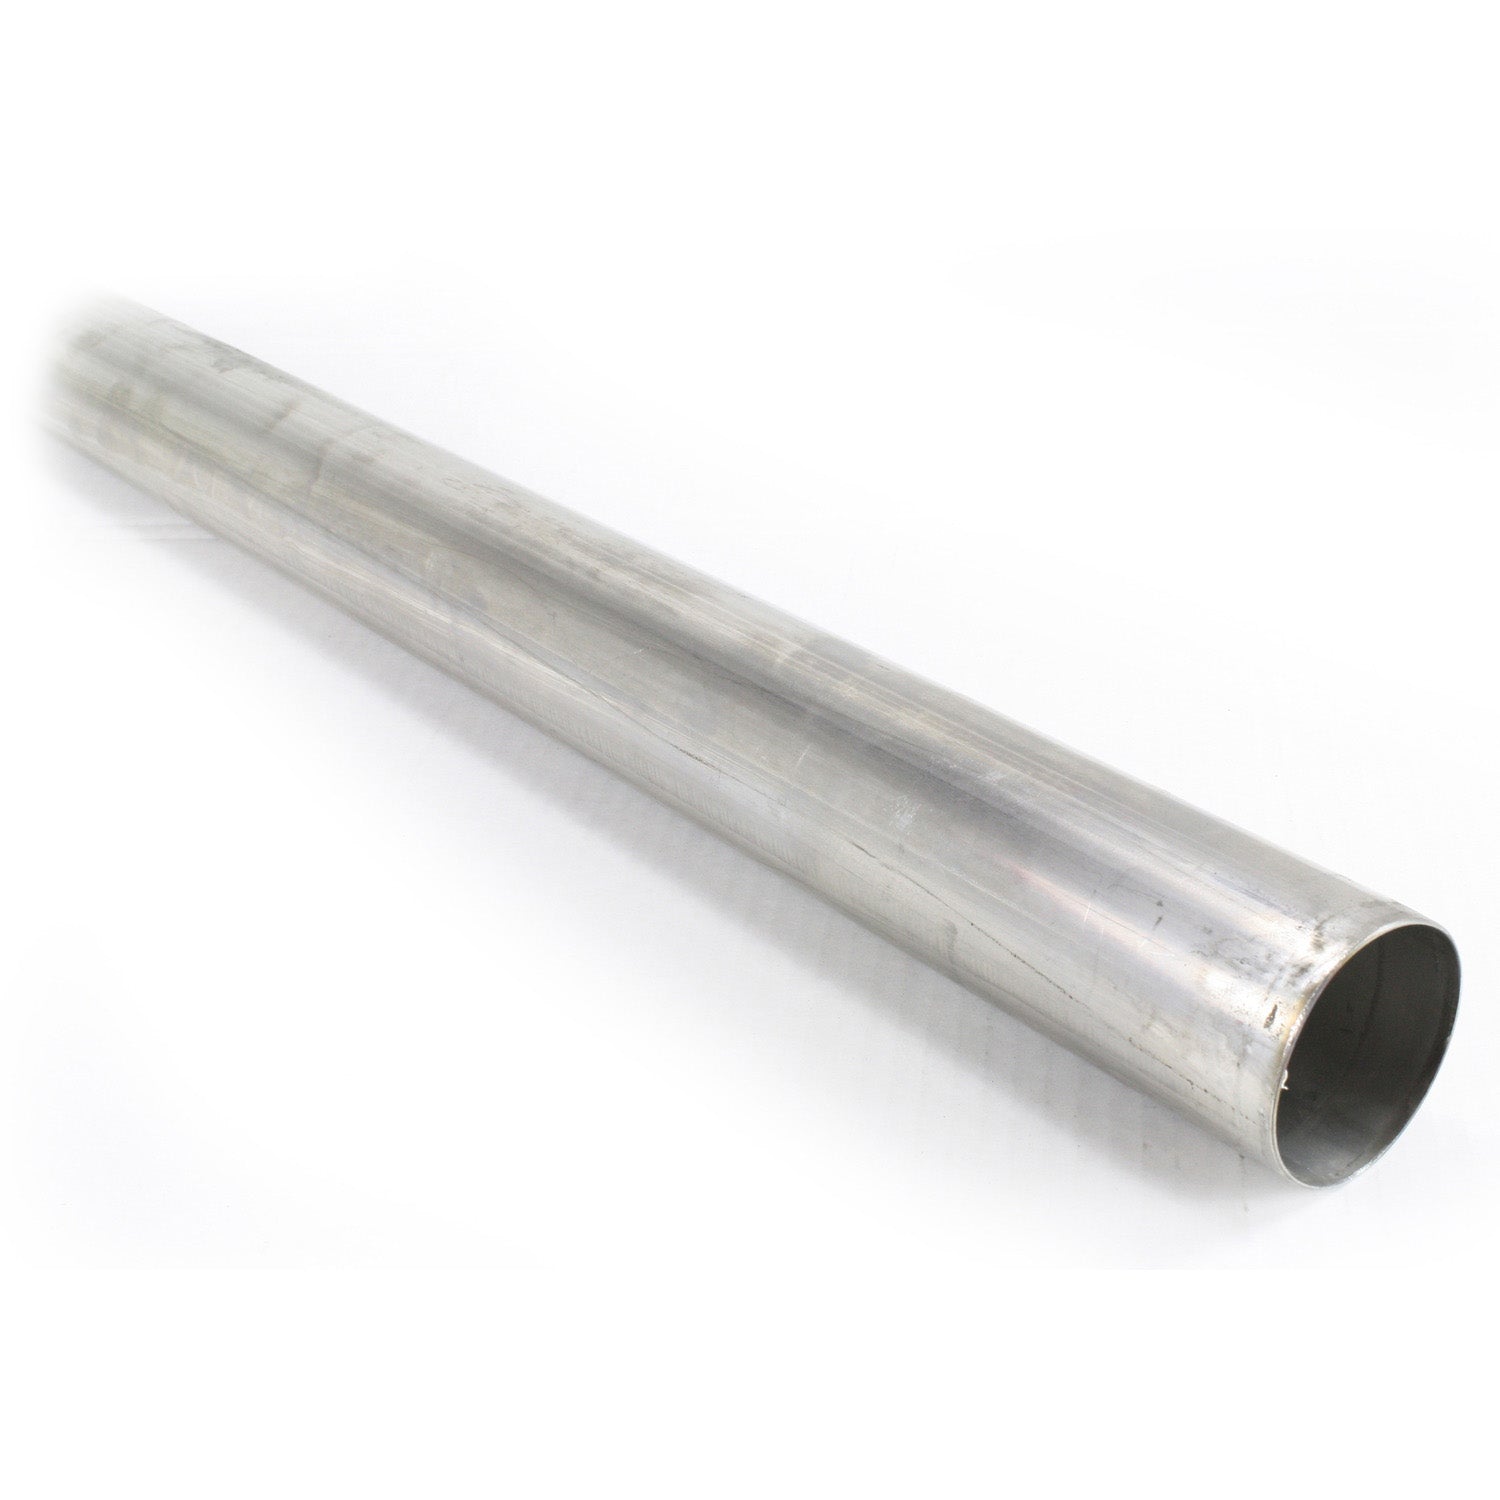 Patriot Exhaust H7715 Tubing 304 Stainless Steel 2 1/2"